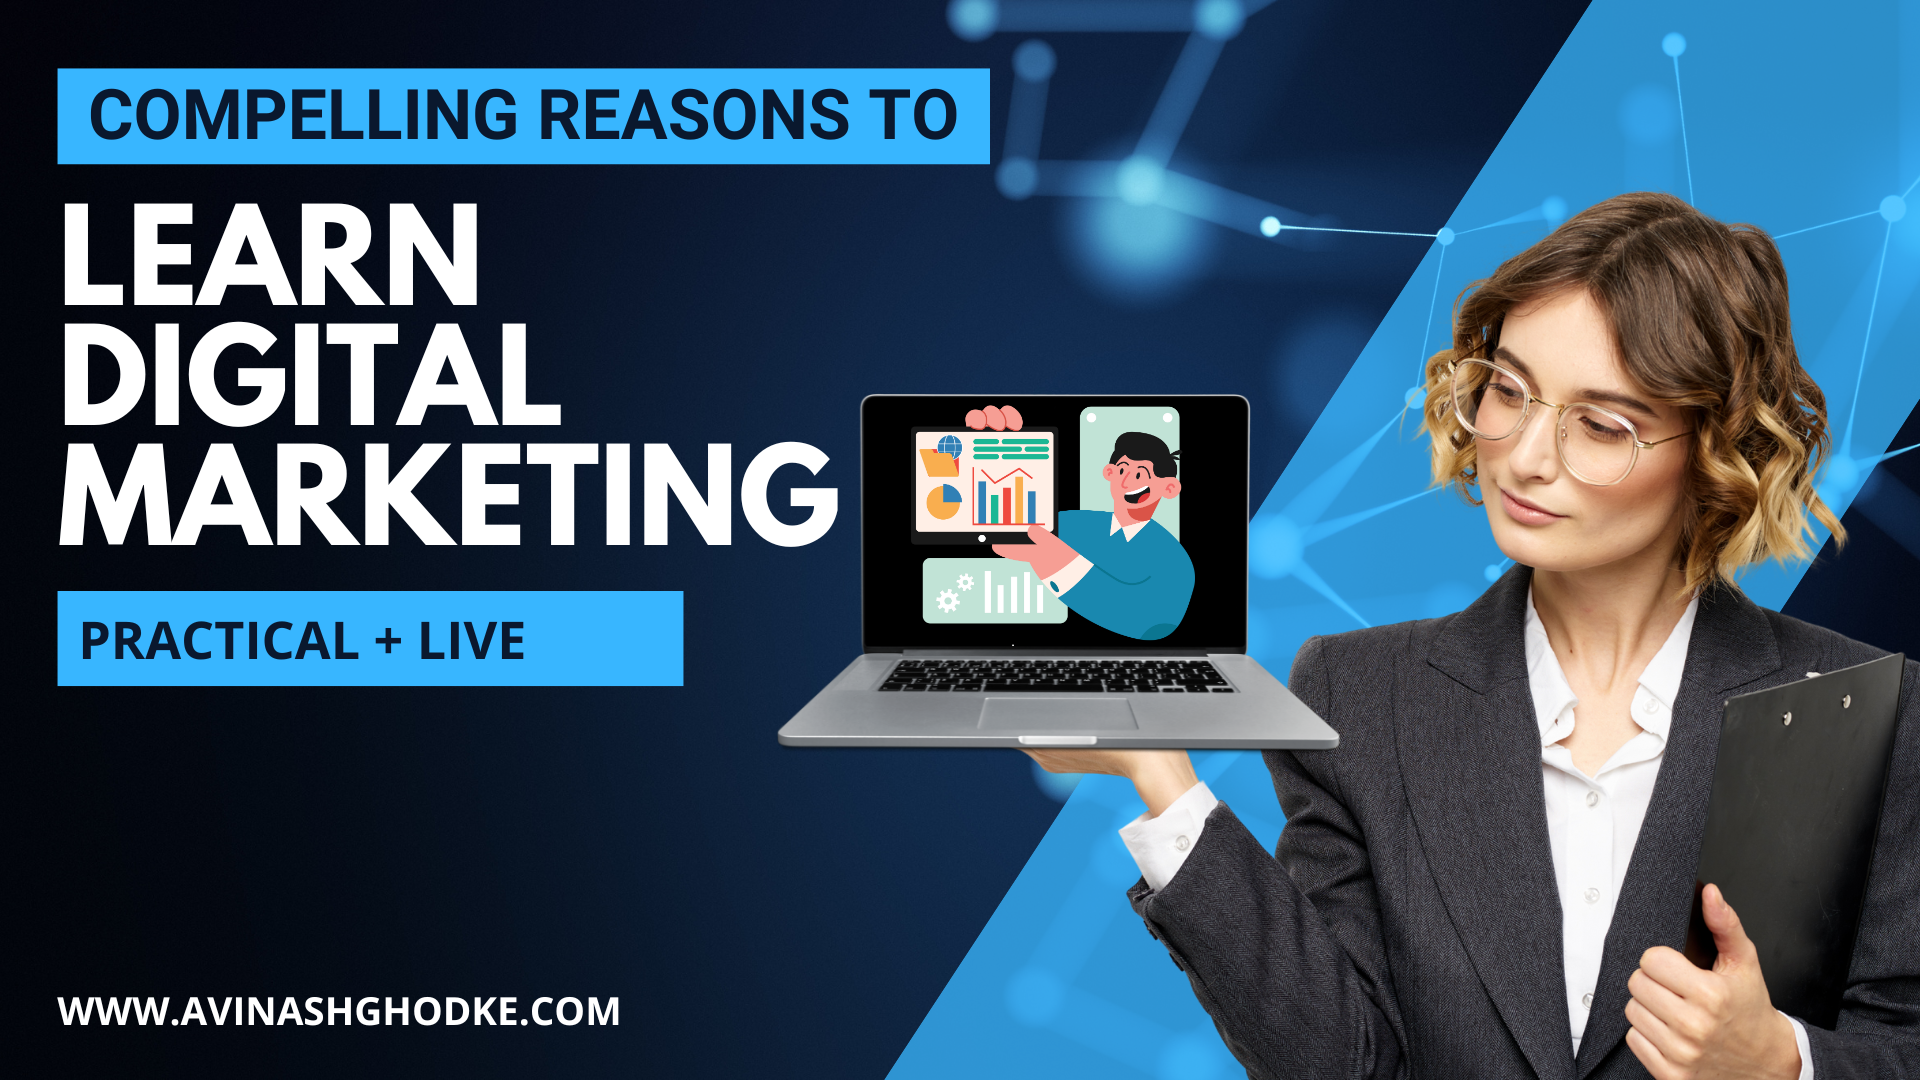 15 Compelling Reasons to Enroll in an Online Digital Marketing Course in 2023